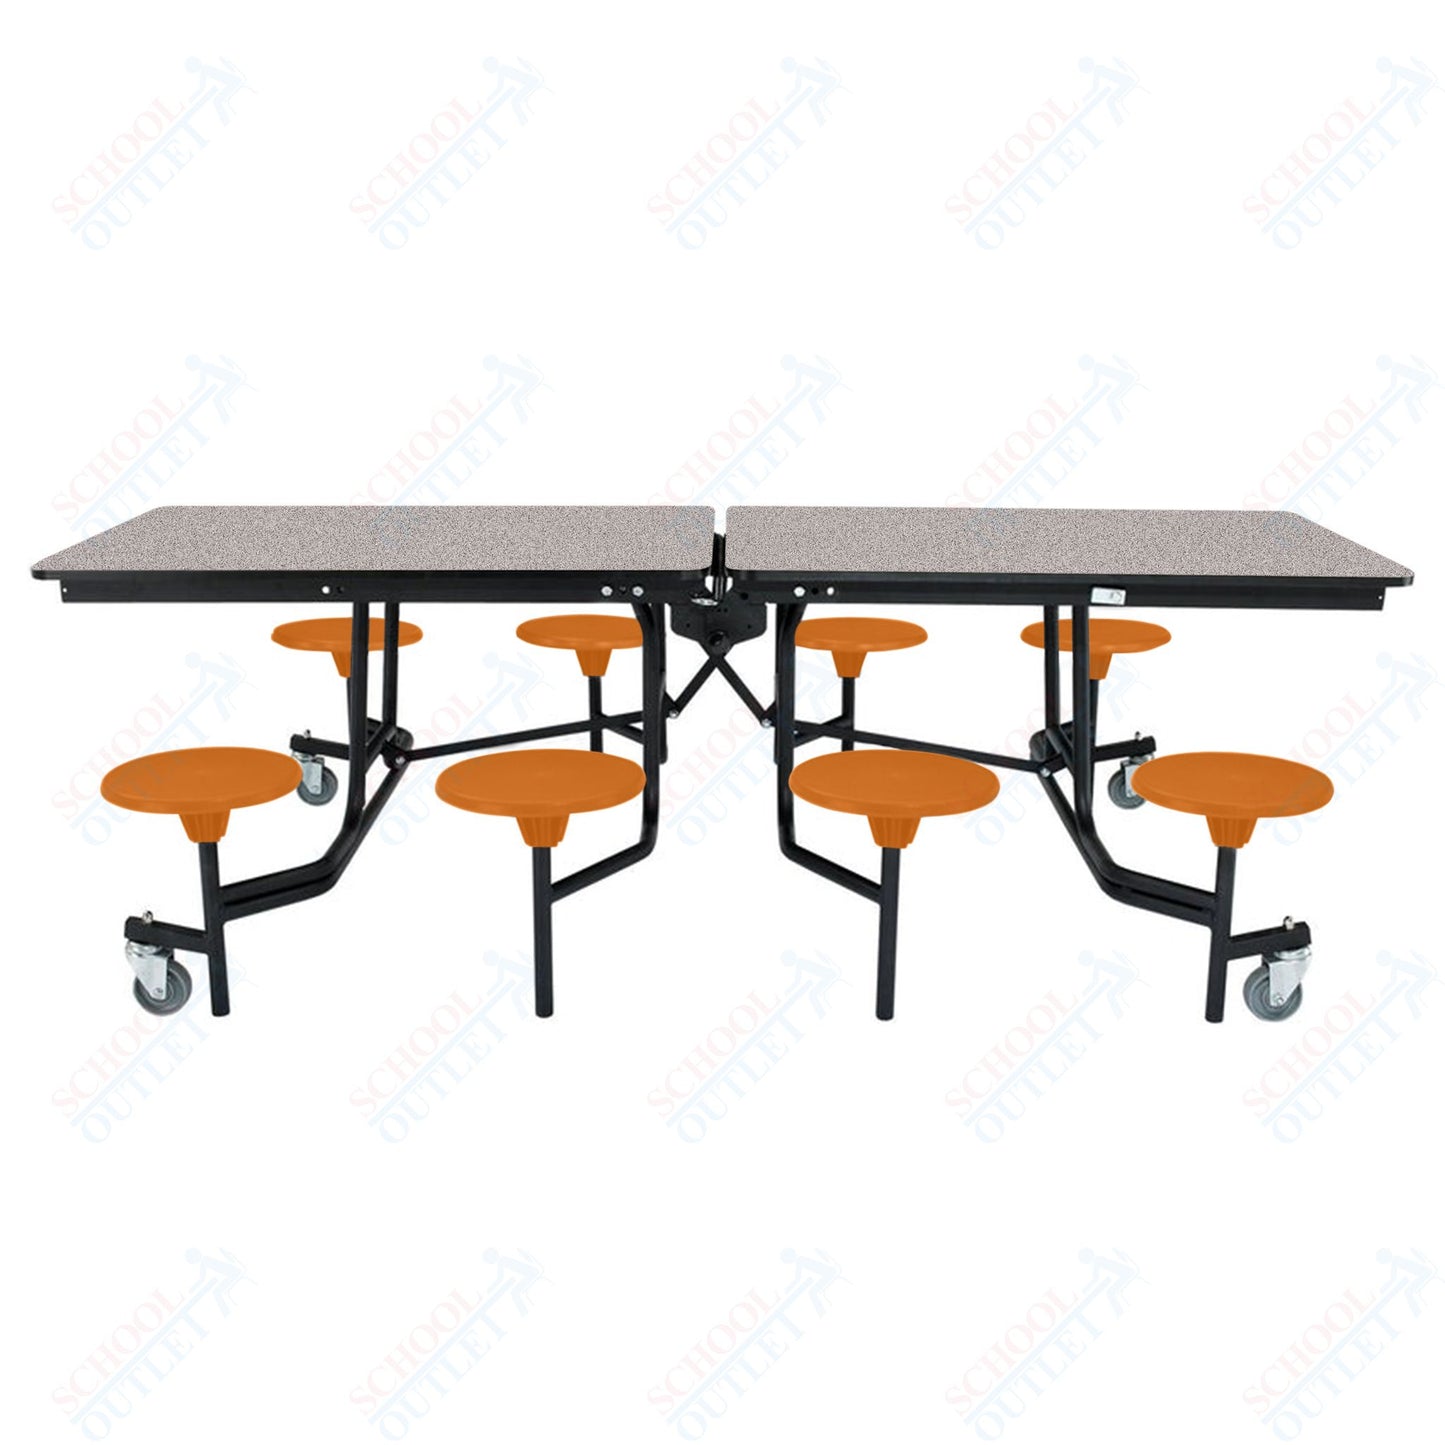 NPS Mobile Cafeteria Table - 30" W x 8' L - 8 Stools - Plywood Core - Protect Edge - Black Powdercoated Frame